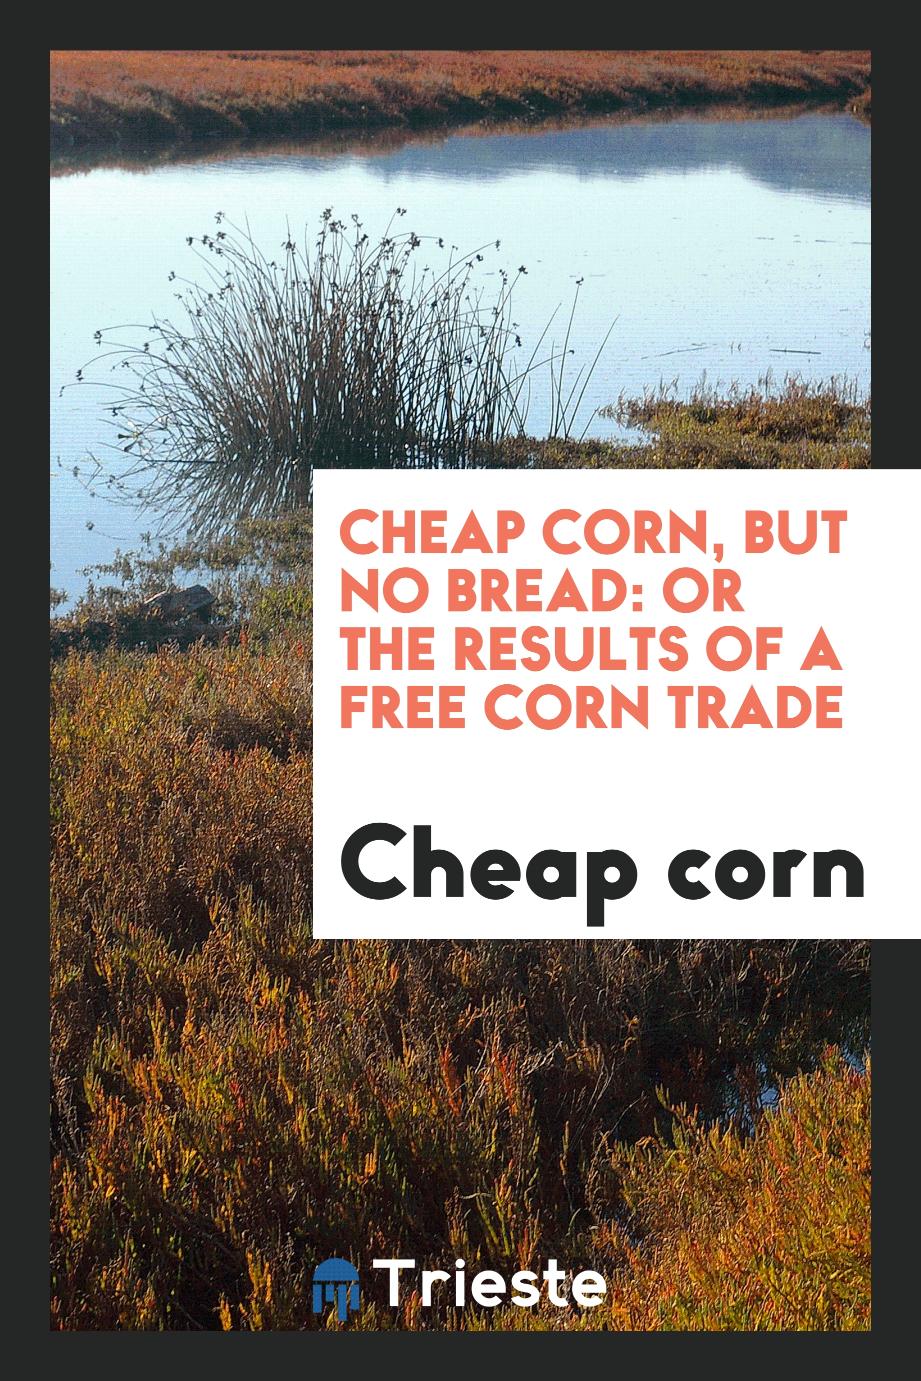 Cheap Corn, But No Bread: Or The Results of a Free Corn Trade